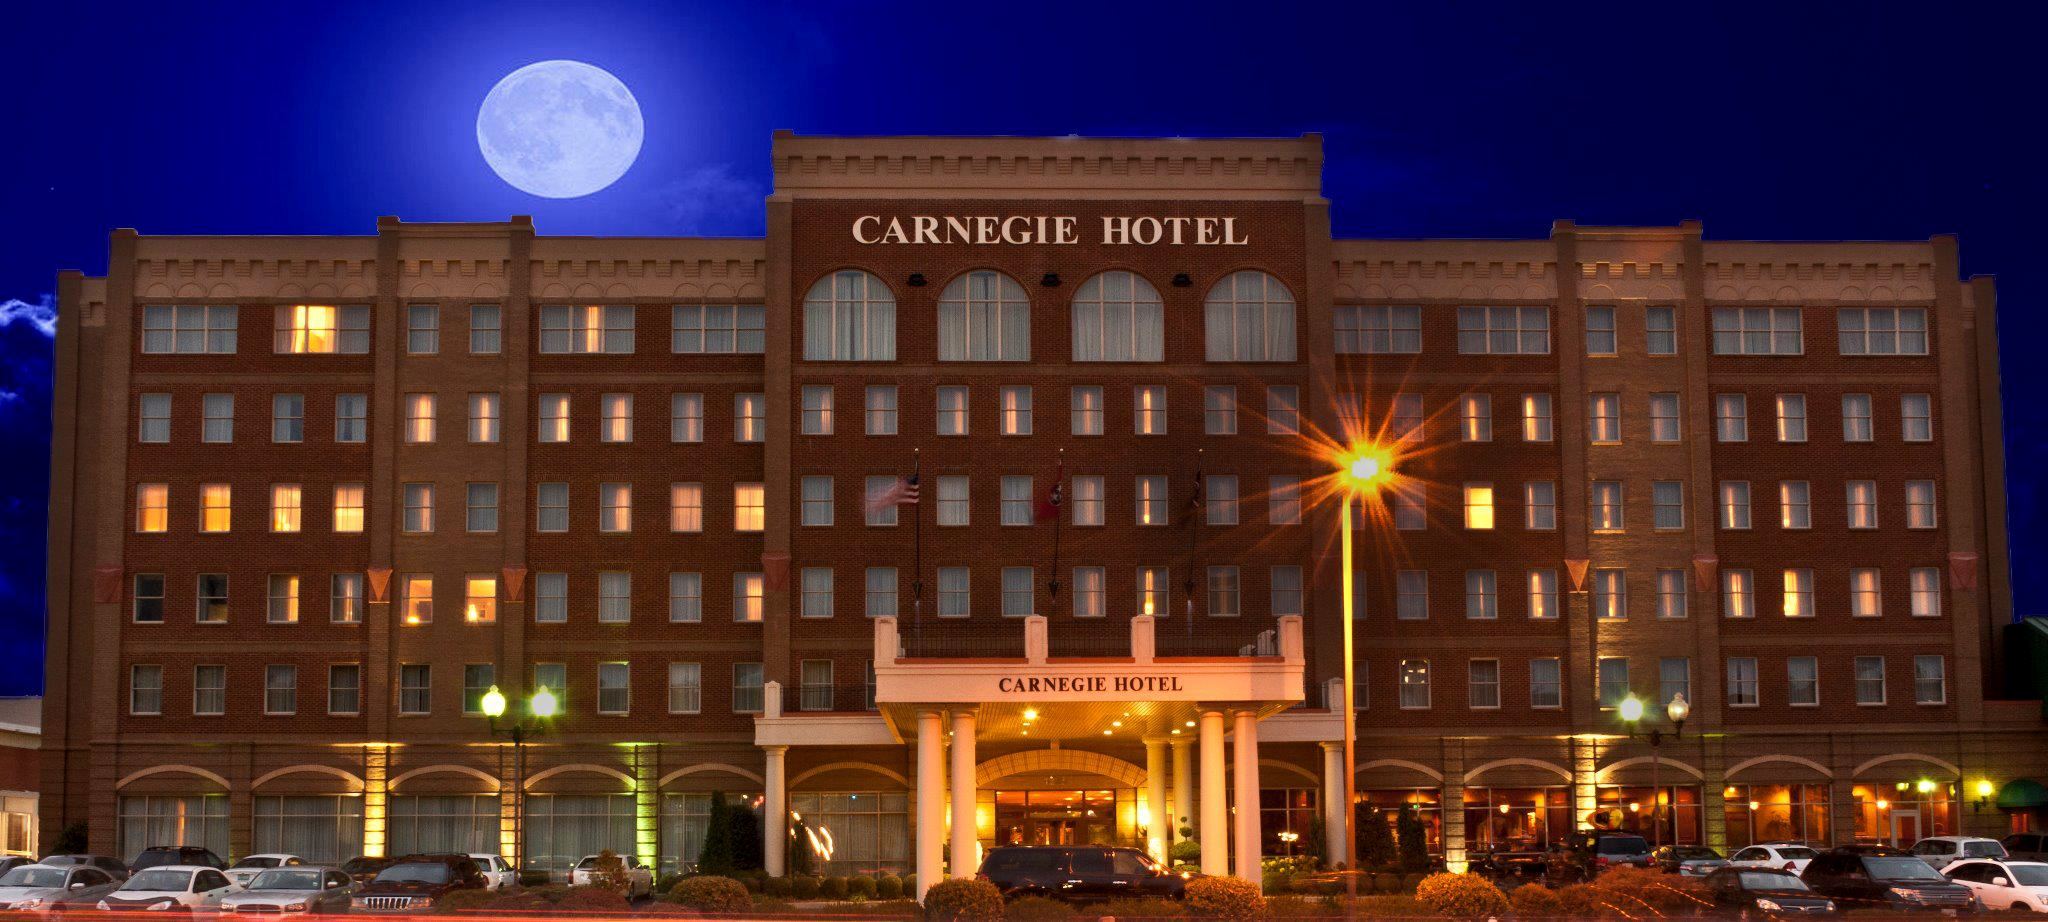 The Carneige Hotel - 1